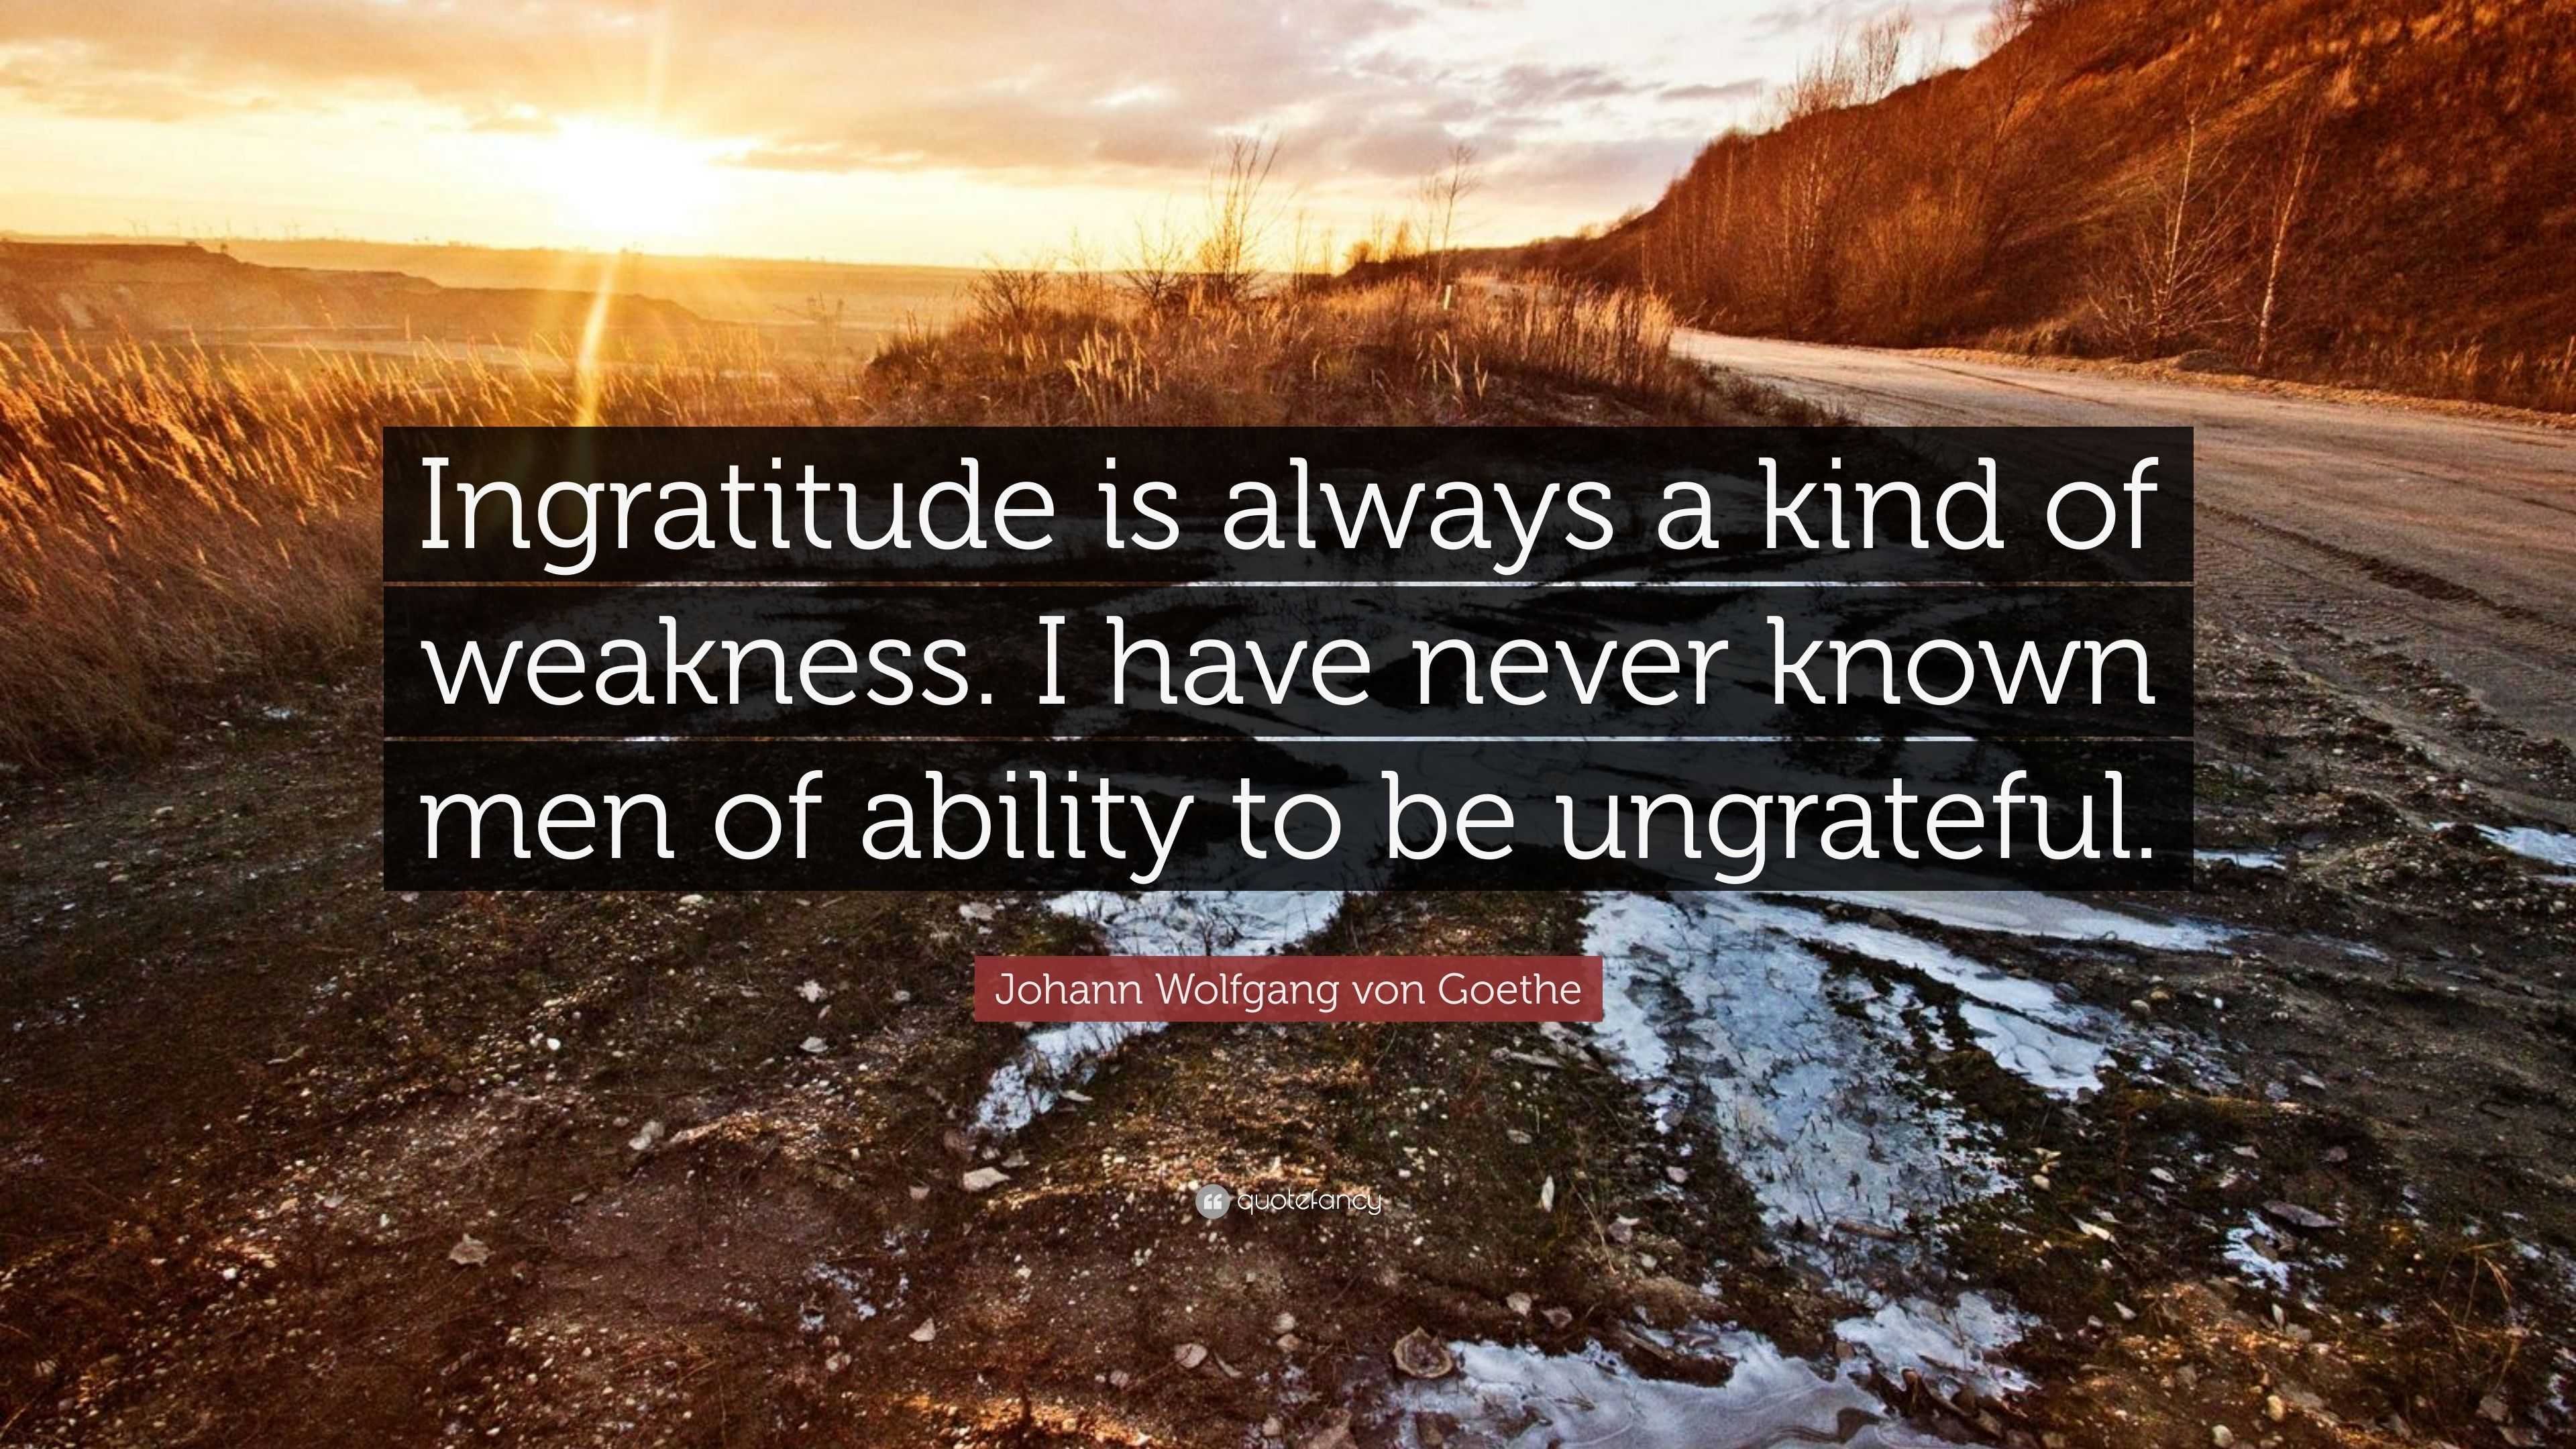 Johann Wolfgang von Goethe Quote: "Ingratitude is always a kind of weakness. I have never known ...